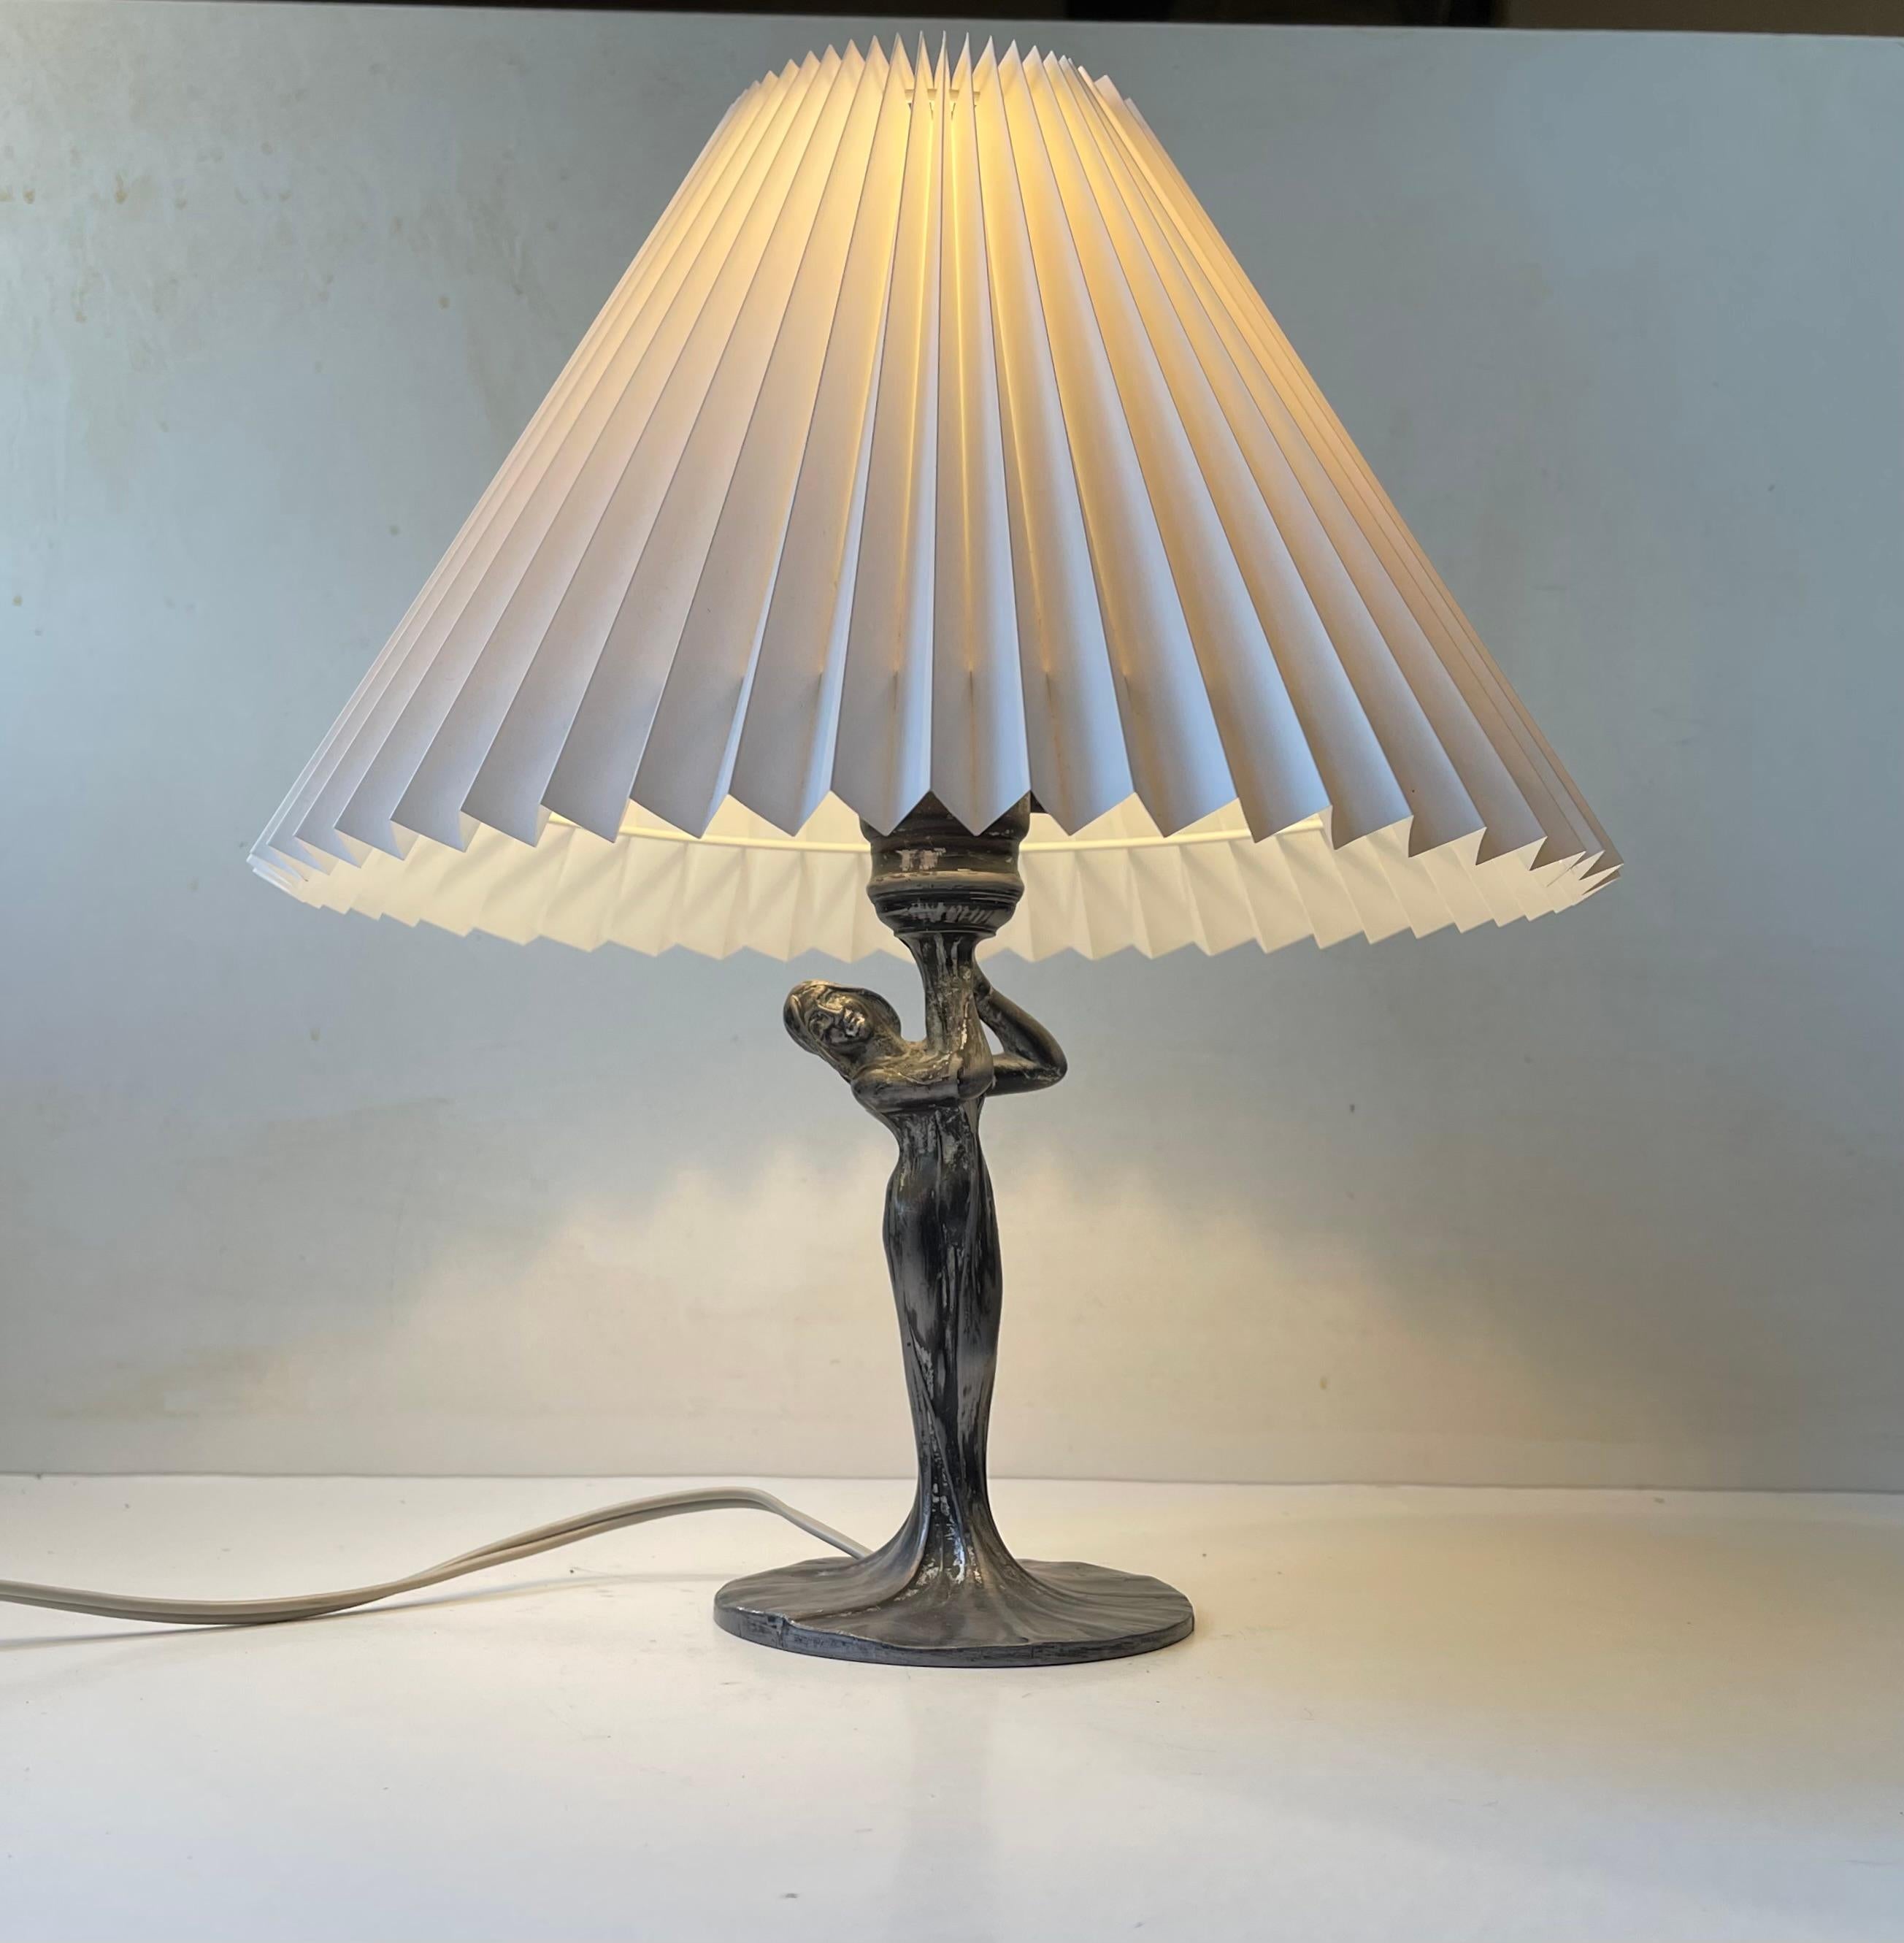 French Art Deco 'Dress' Table Lamp in Pewter, 1930s For Sale 2